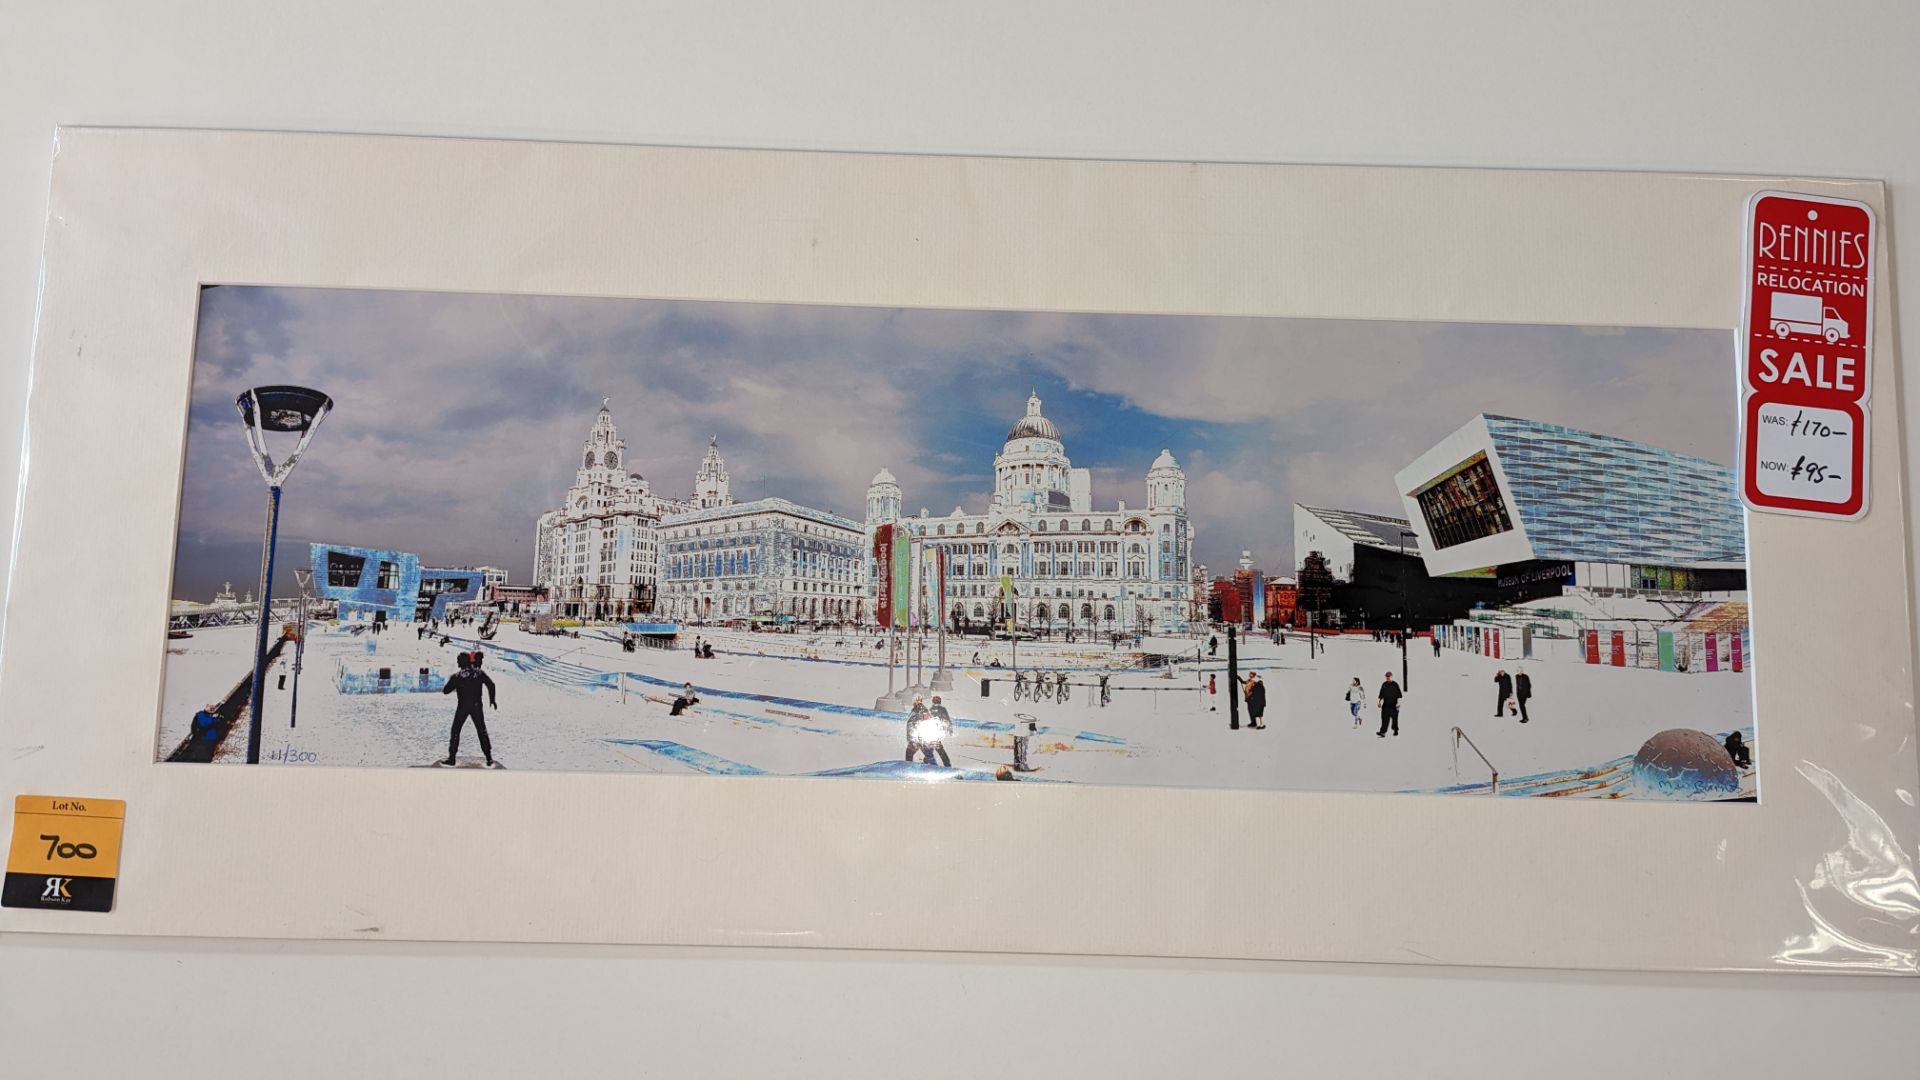 Limited edition print, no. 11/300, of Liverpool scene by M W Burns. Original selling price £170. In - Image 7 of 11